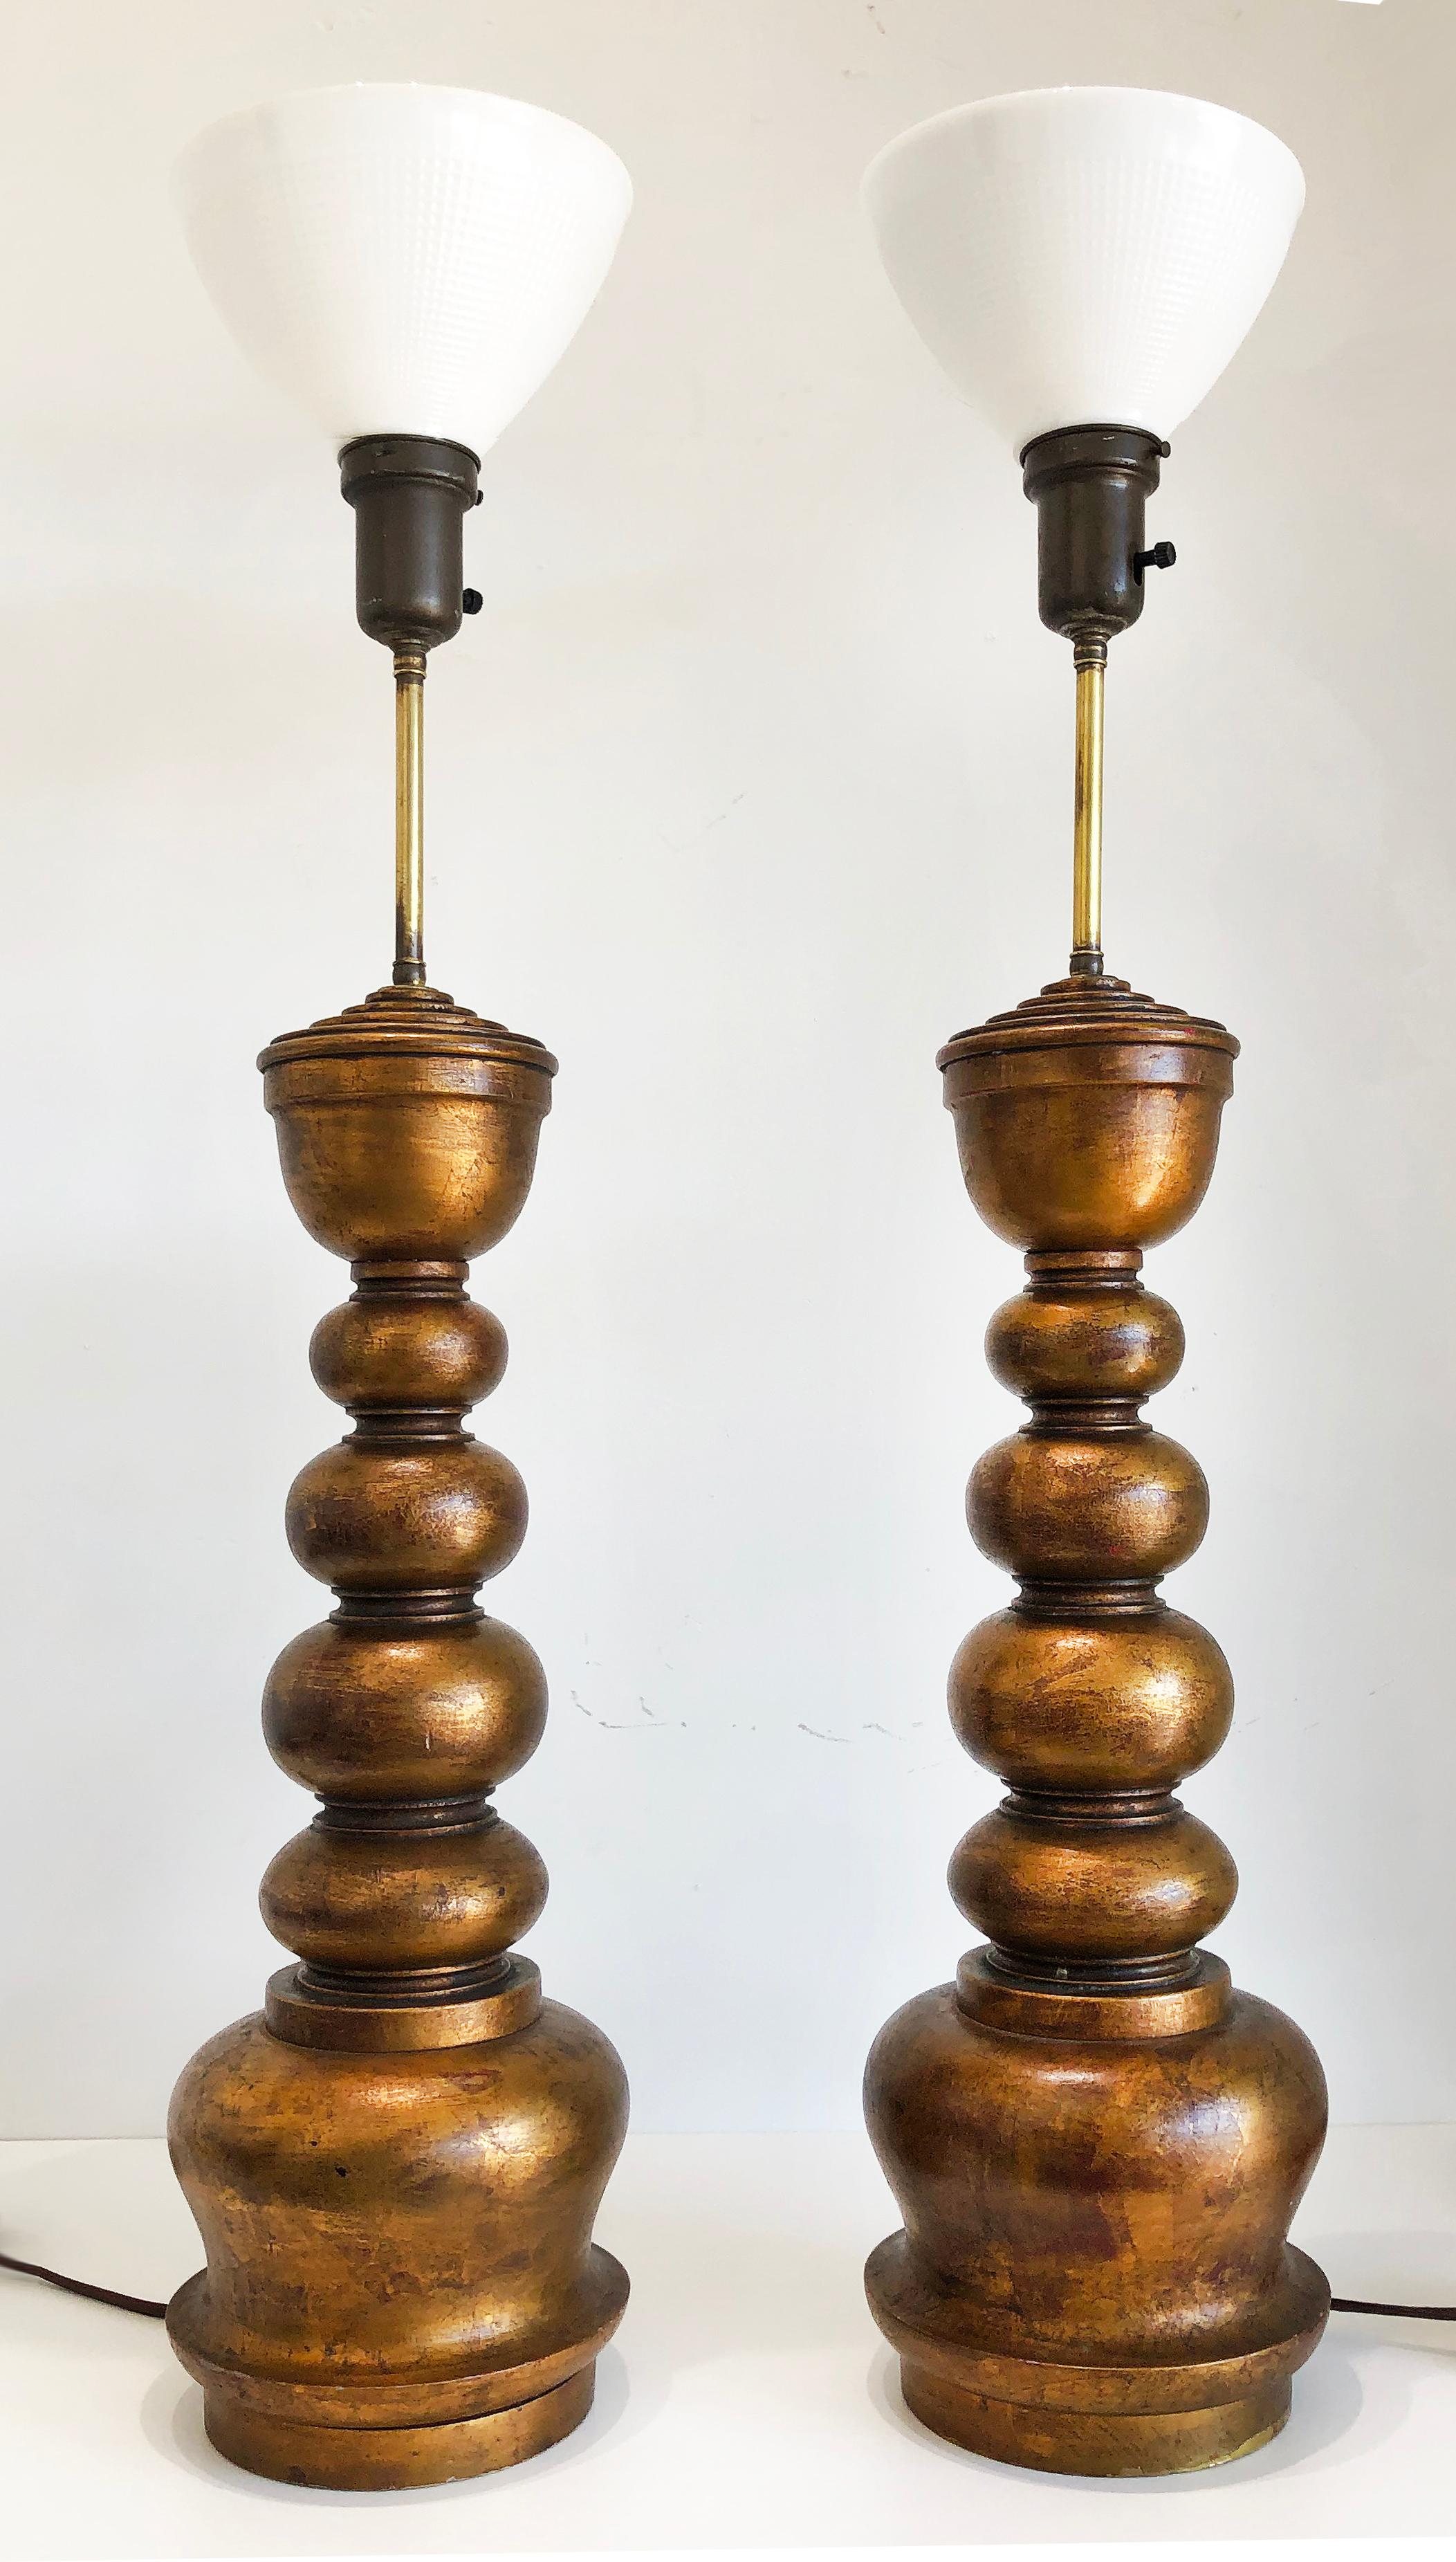 1940s overscaled giltwood lamps attributed to James Mont, Pair

Offered for sale is a pair of overscaled 1940s giltwood wood lamps attributed to James Mont. The lamps are solid wood with gold leaf finished and include the milk glass diffusers